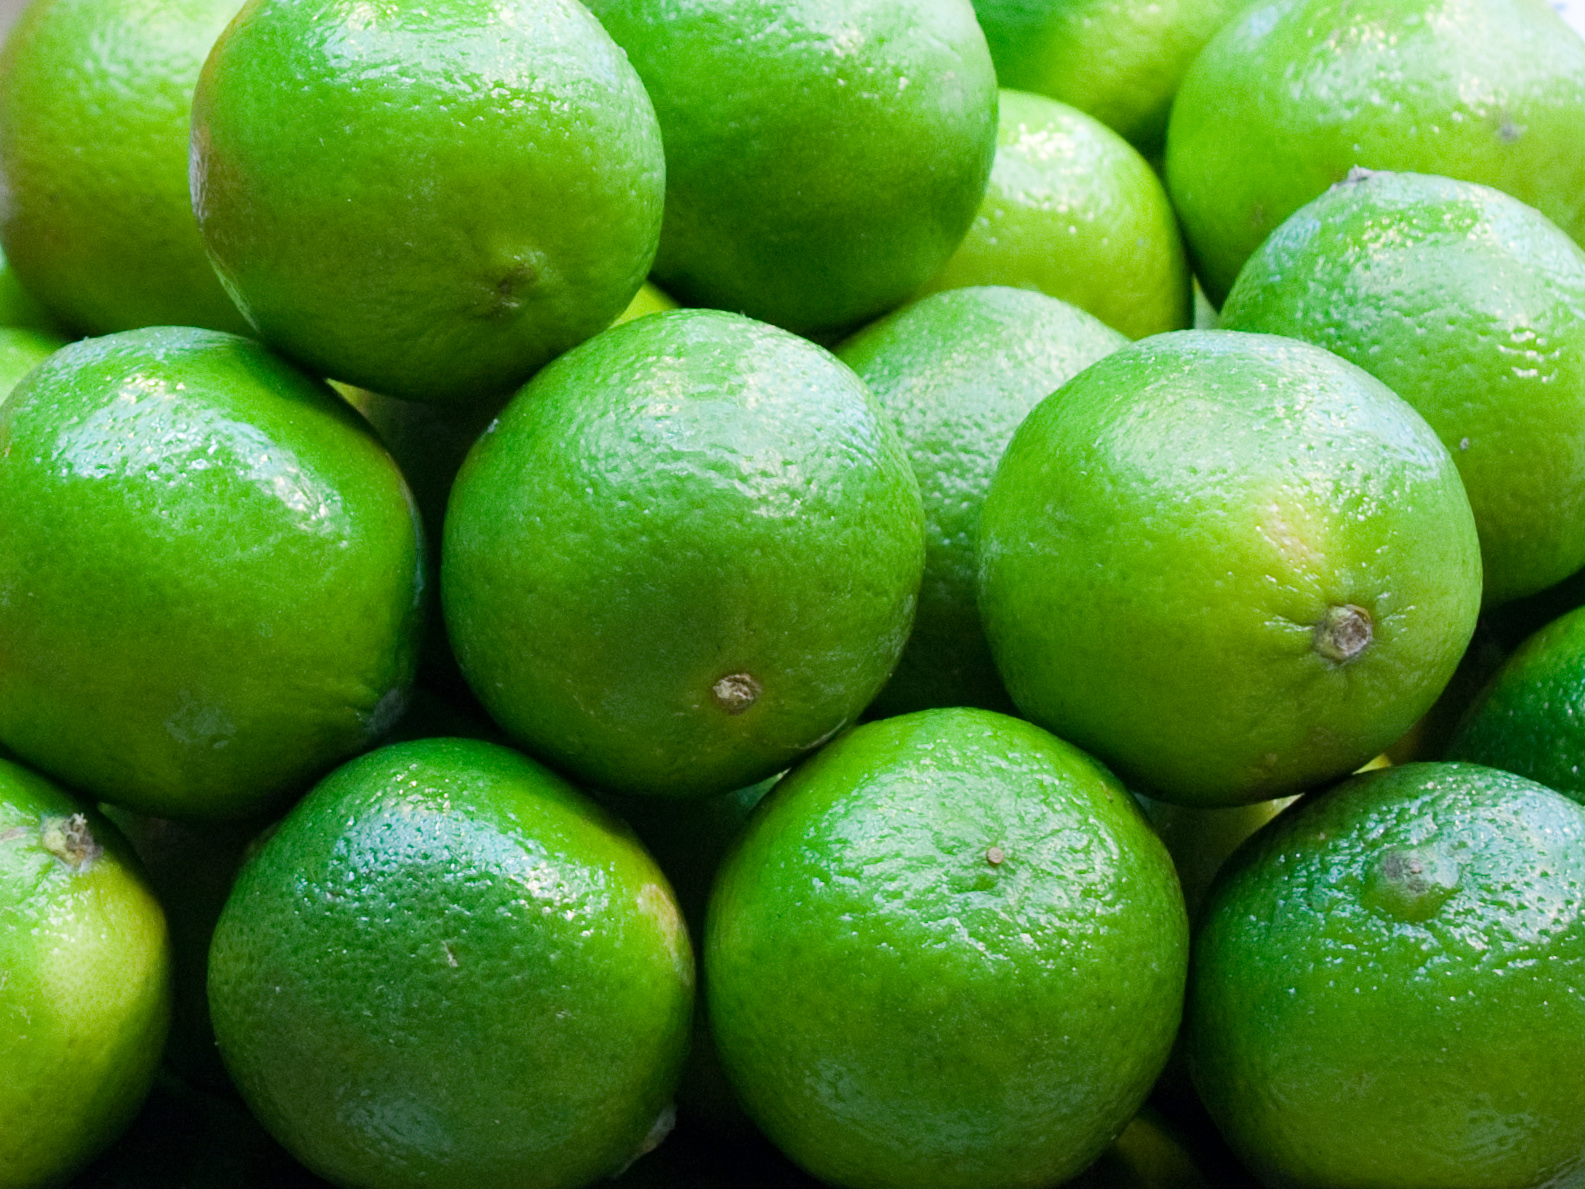 some limes are piled on top of each other